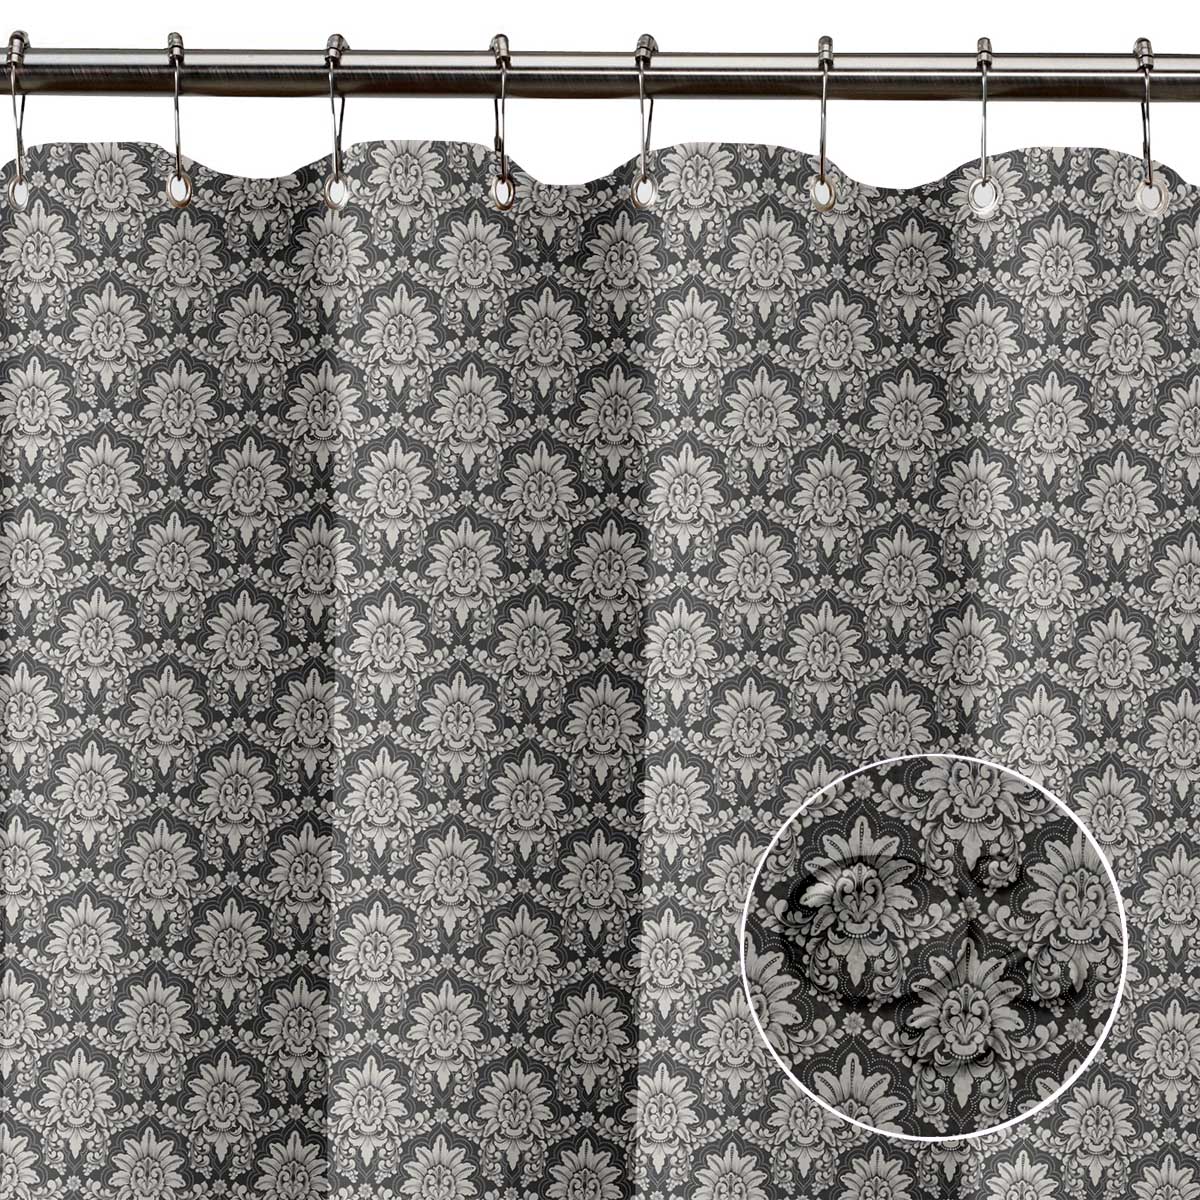 S4Sassy Grey Damask Floral Water Repellent Bath Shower Curtain With-DUQ